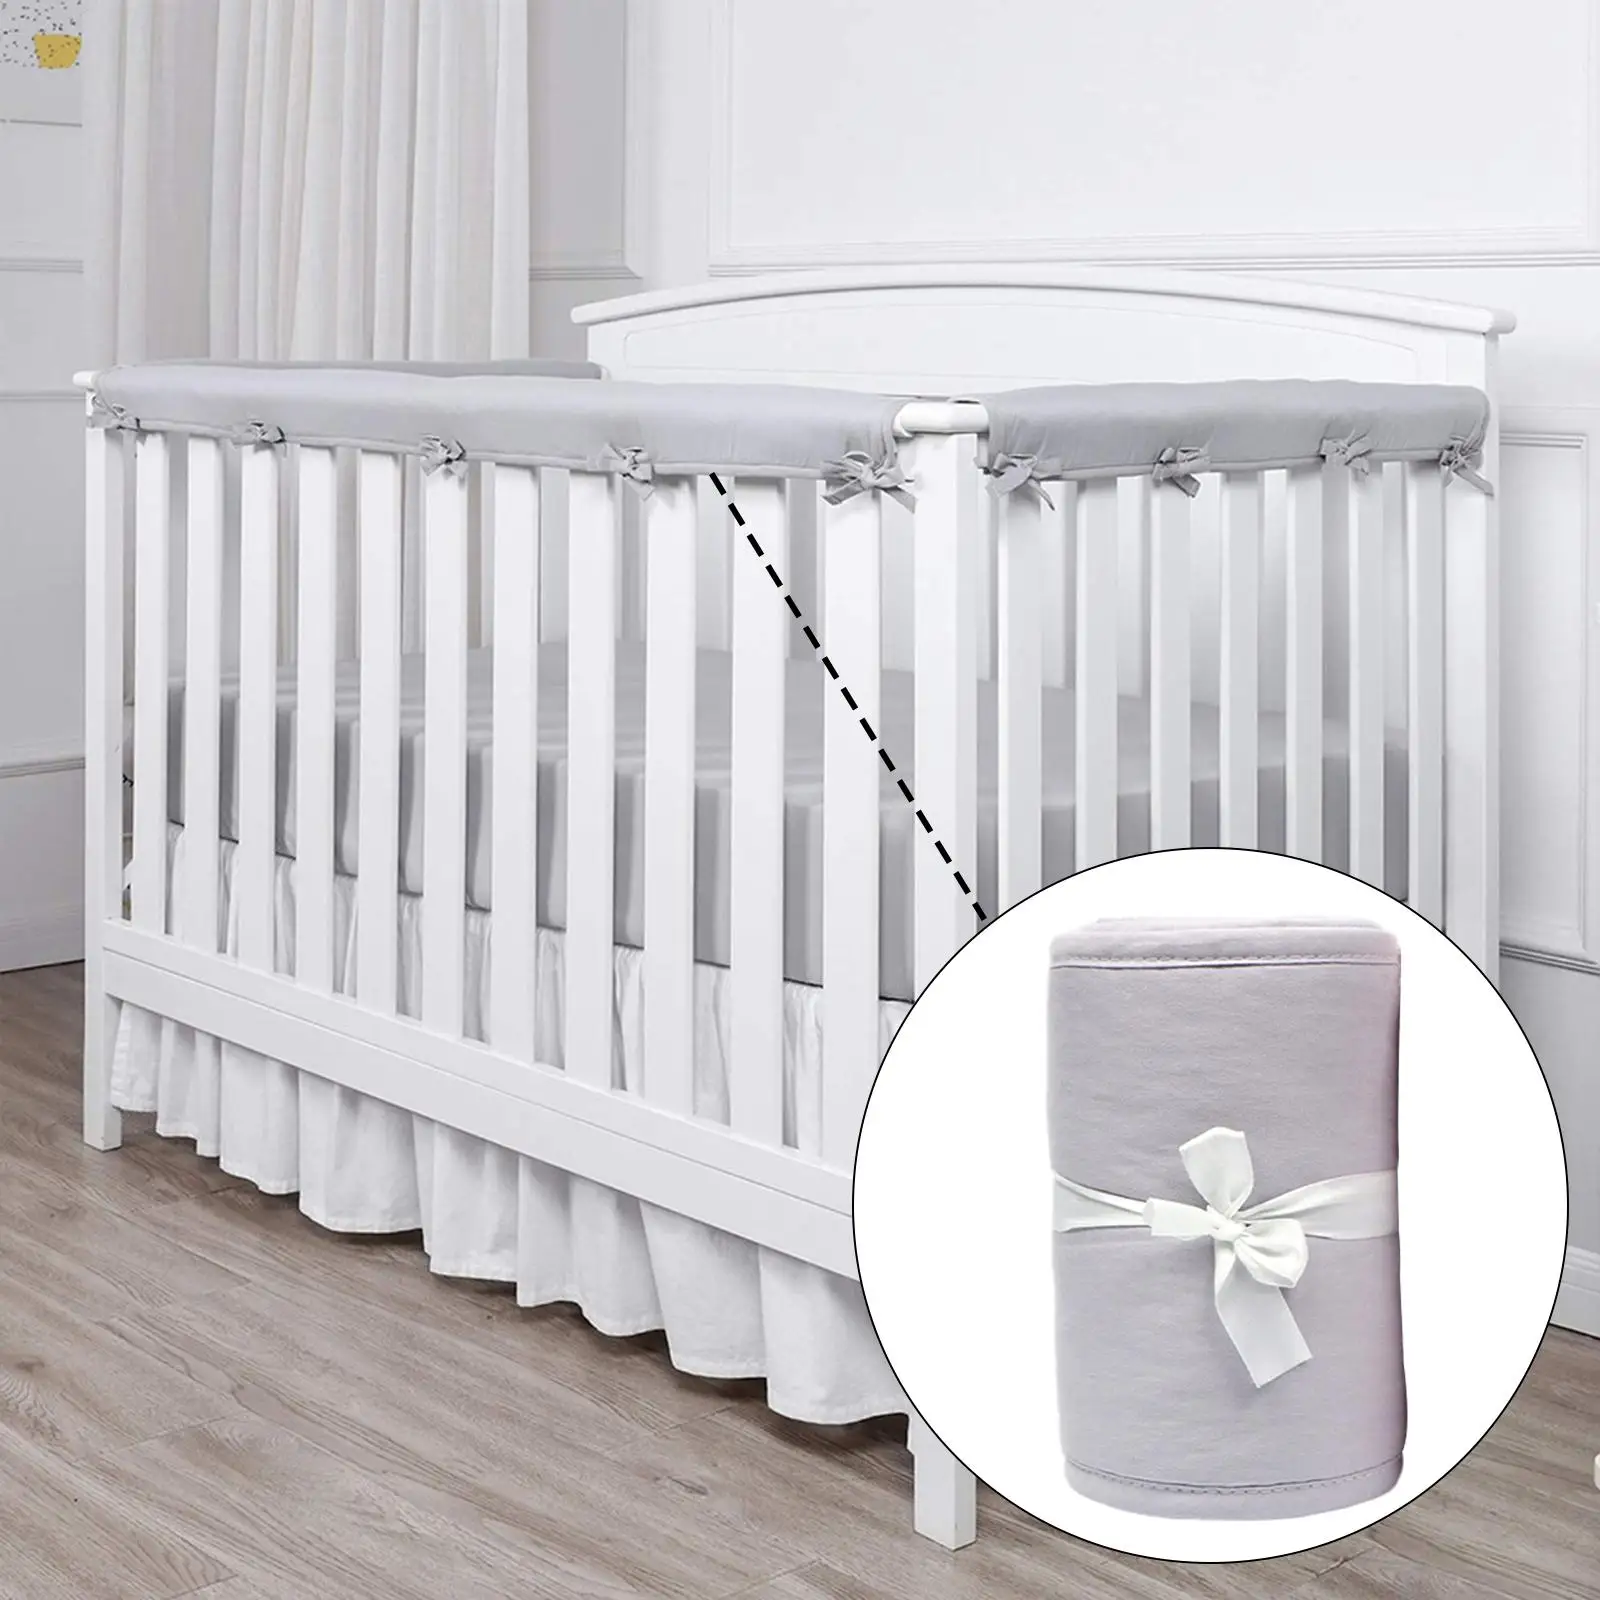 3Pcs Bed Rail Cover Anti Collision Strip Teething Protector Baby Safety Products Guard Crib Bed Rail Cover for Gifts Toddlers